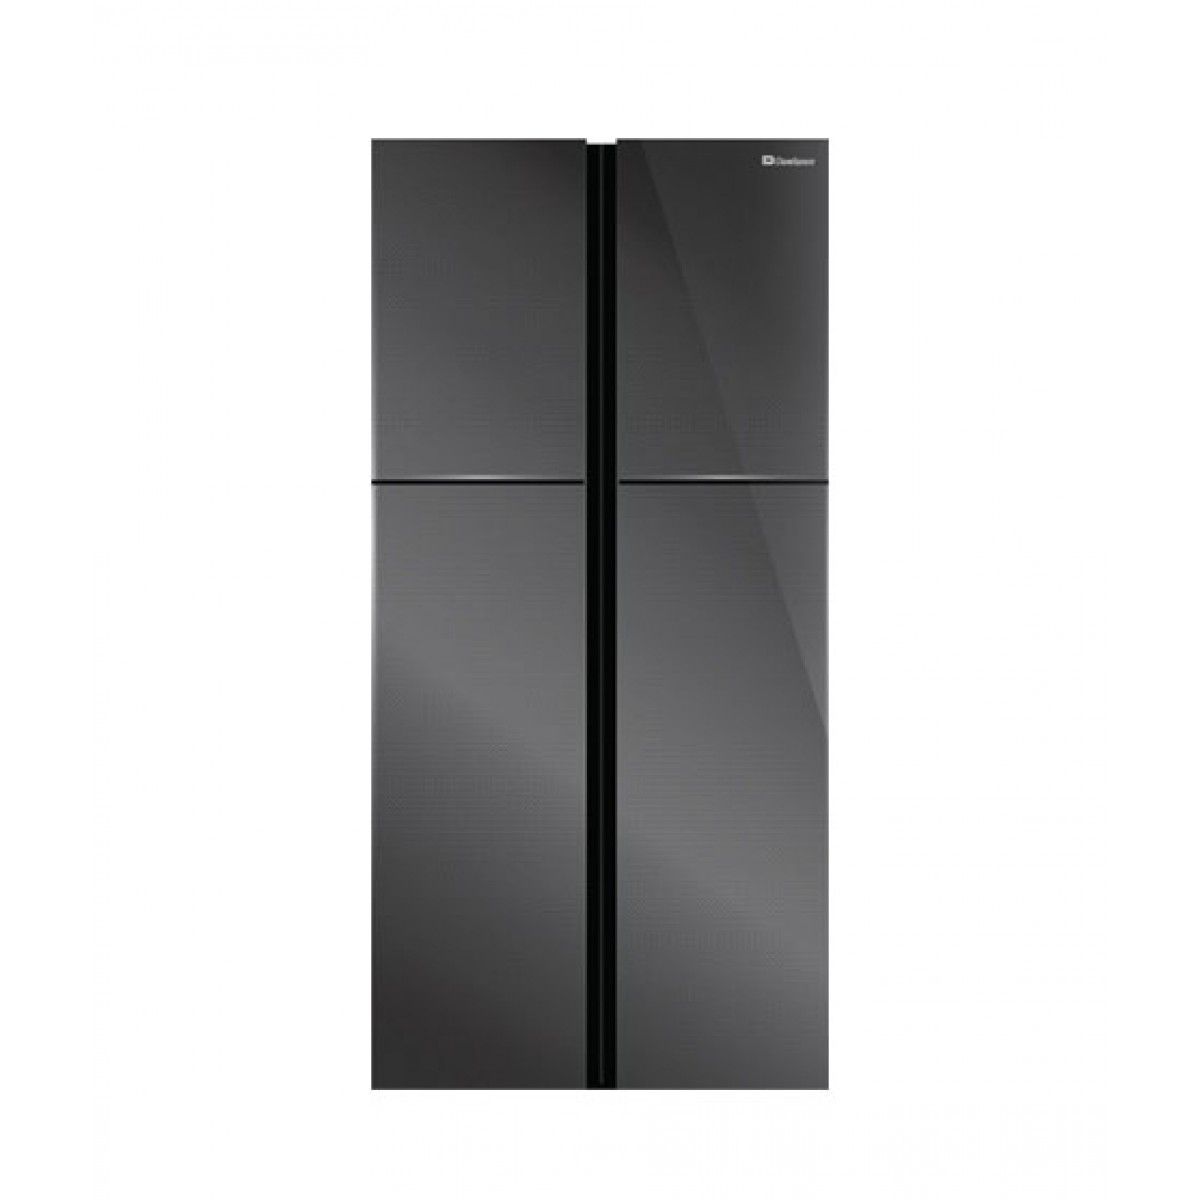 Dawlance DFD-900 Double French Door 24 cu ft  Refrigerator